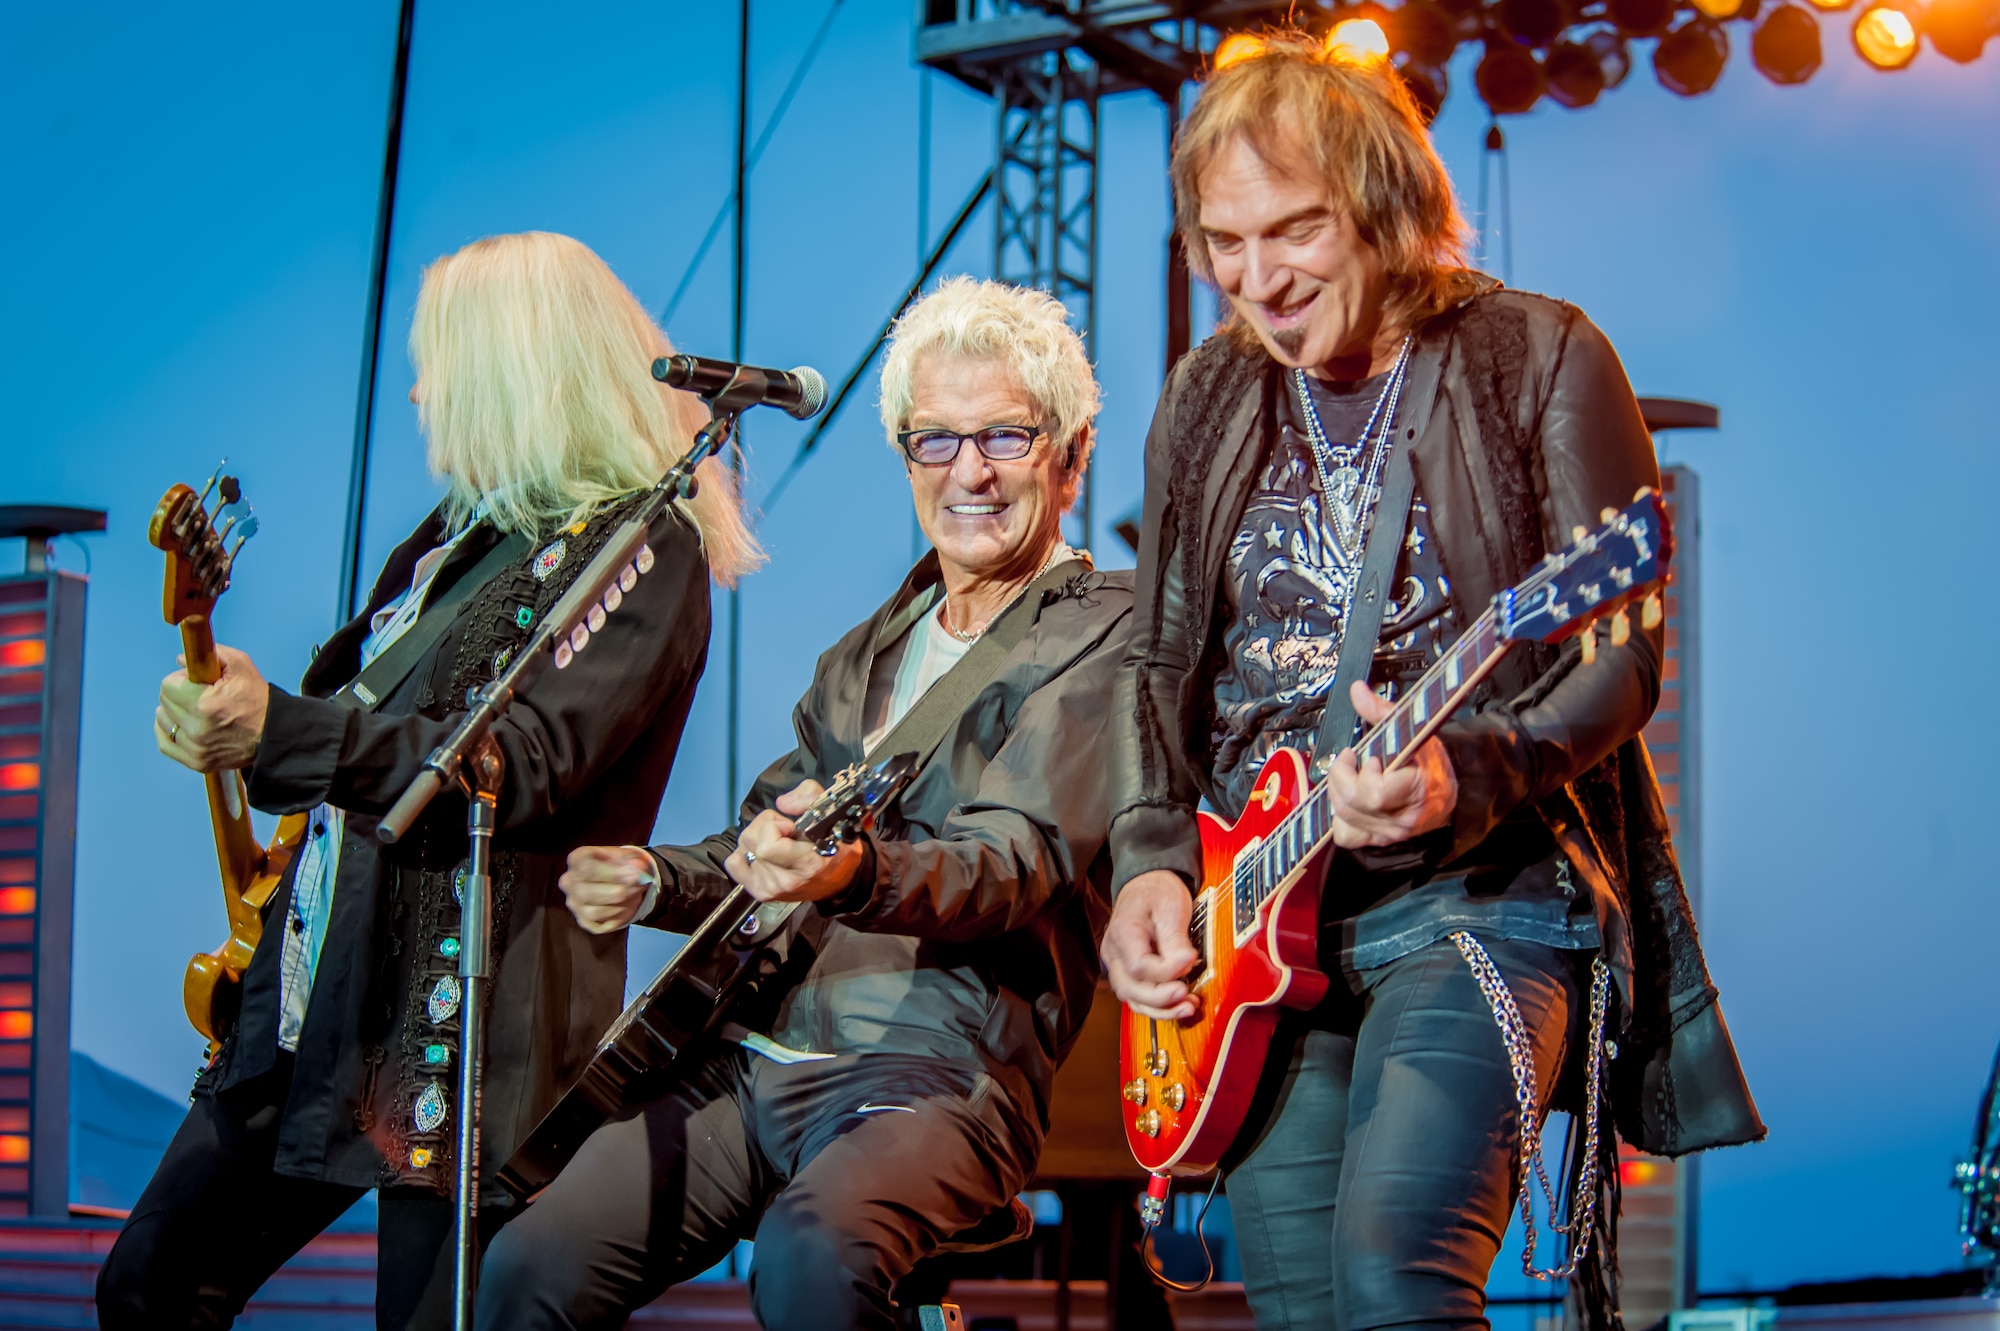 Kevin Cronin, Dave Amato and Bruce Hall, REO Speedwagon musicians, entertain the Spokane community including America's veterans during a Grandstand performance at the Spokane Interstate Fair in Spokane, Washington, Sept. 11, 2014. REO Speedwagon thanked America’s veterans and families, both past and present, for their service and sacrifice in the name of freedom. Total force Airmen from around the globe took time to commemorate the 13th anniversary of Sept. 11, 2001, with everything from commemorative runs, to tributes and moments of silence. (U.S. Air Force photo by Staff Sgt. Benjamin W. Stratton/Released)